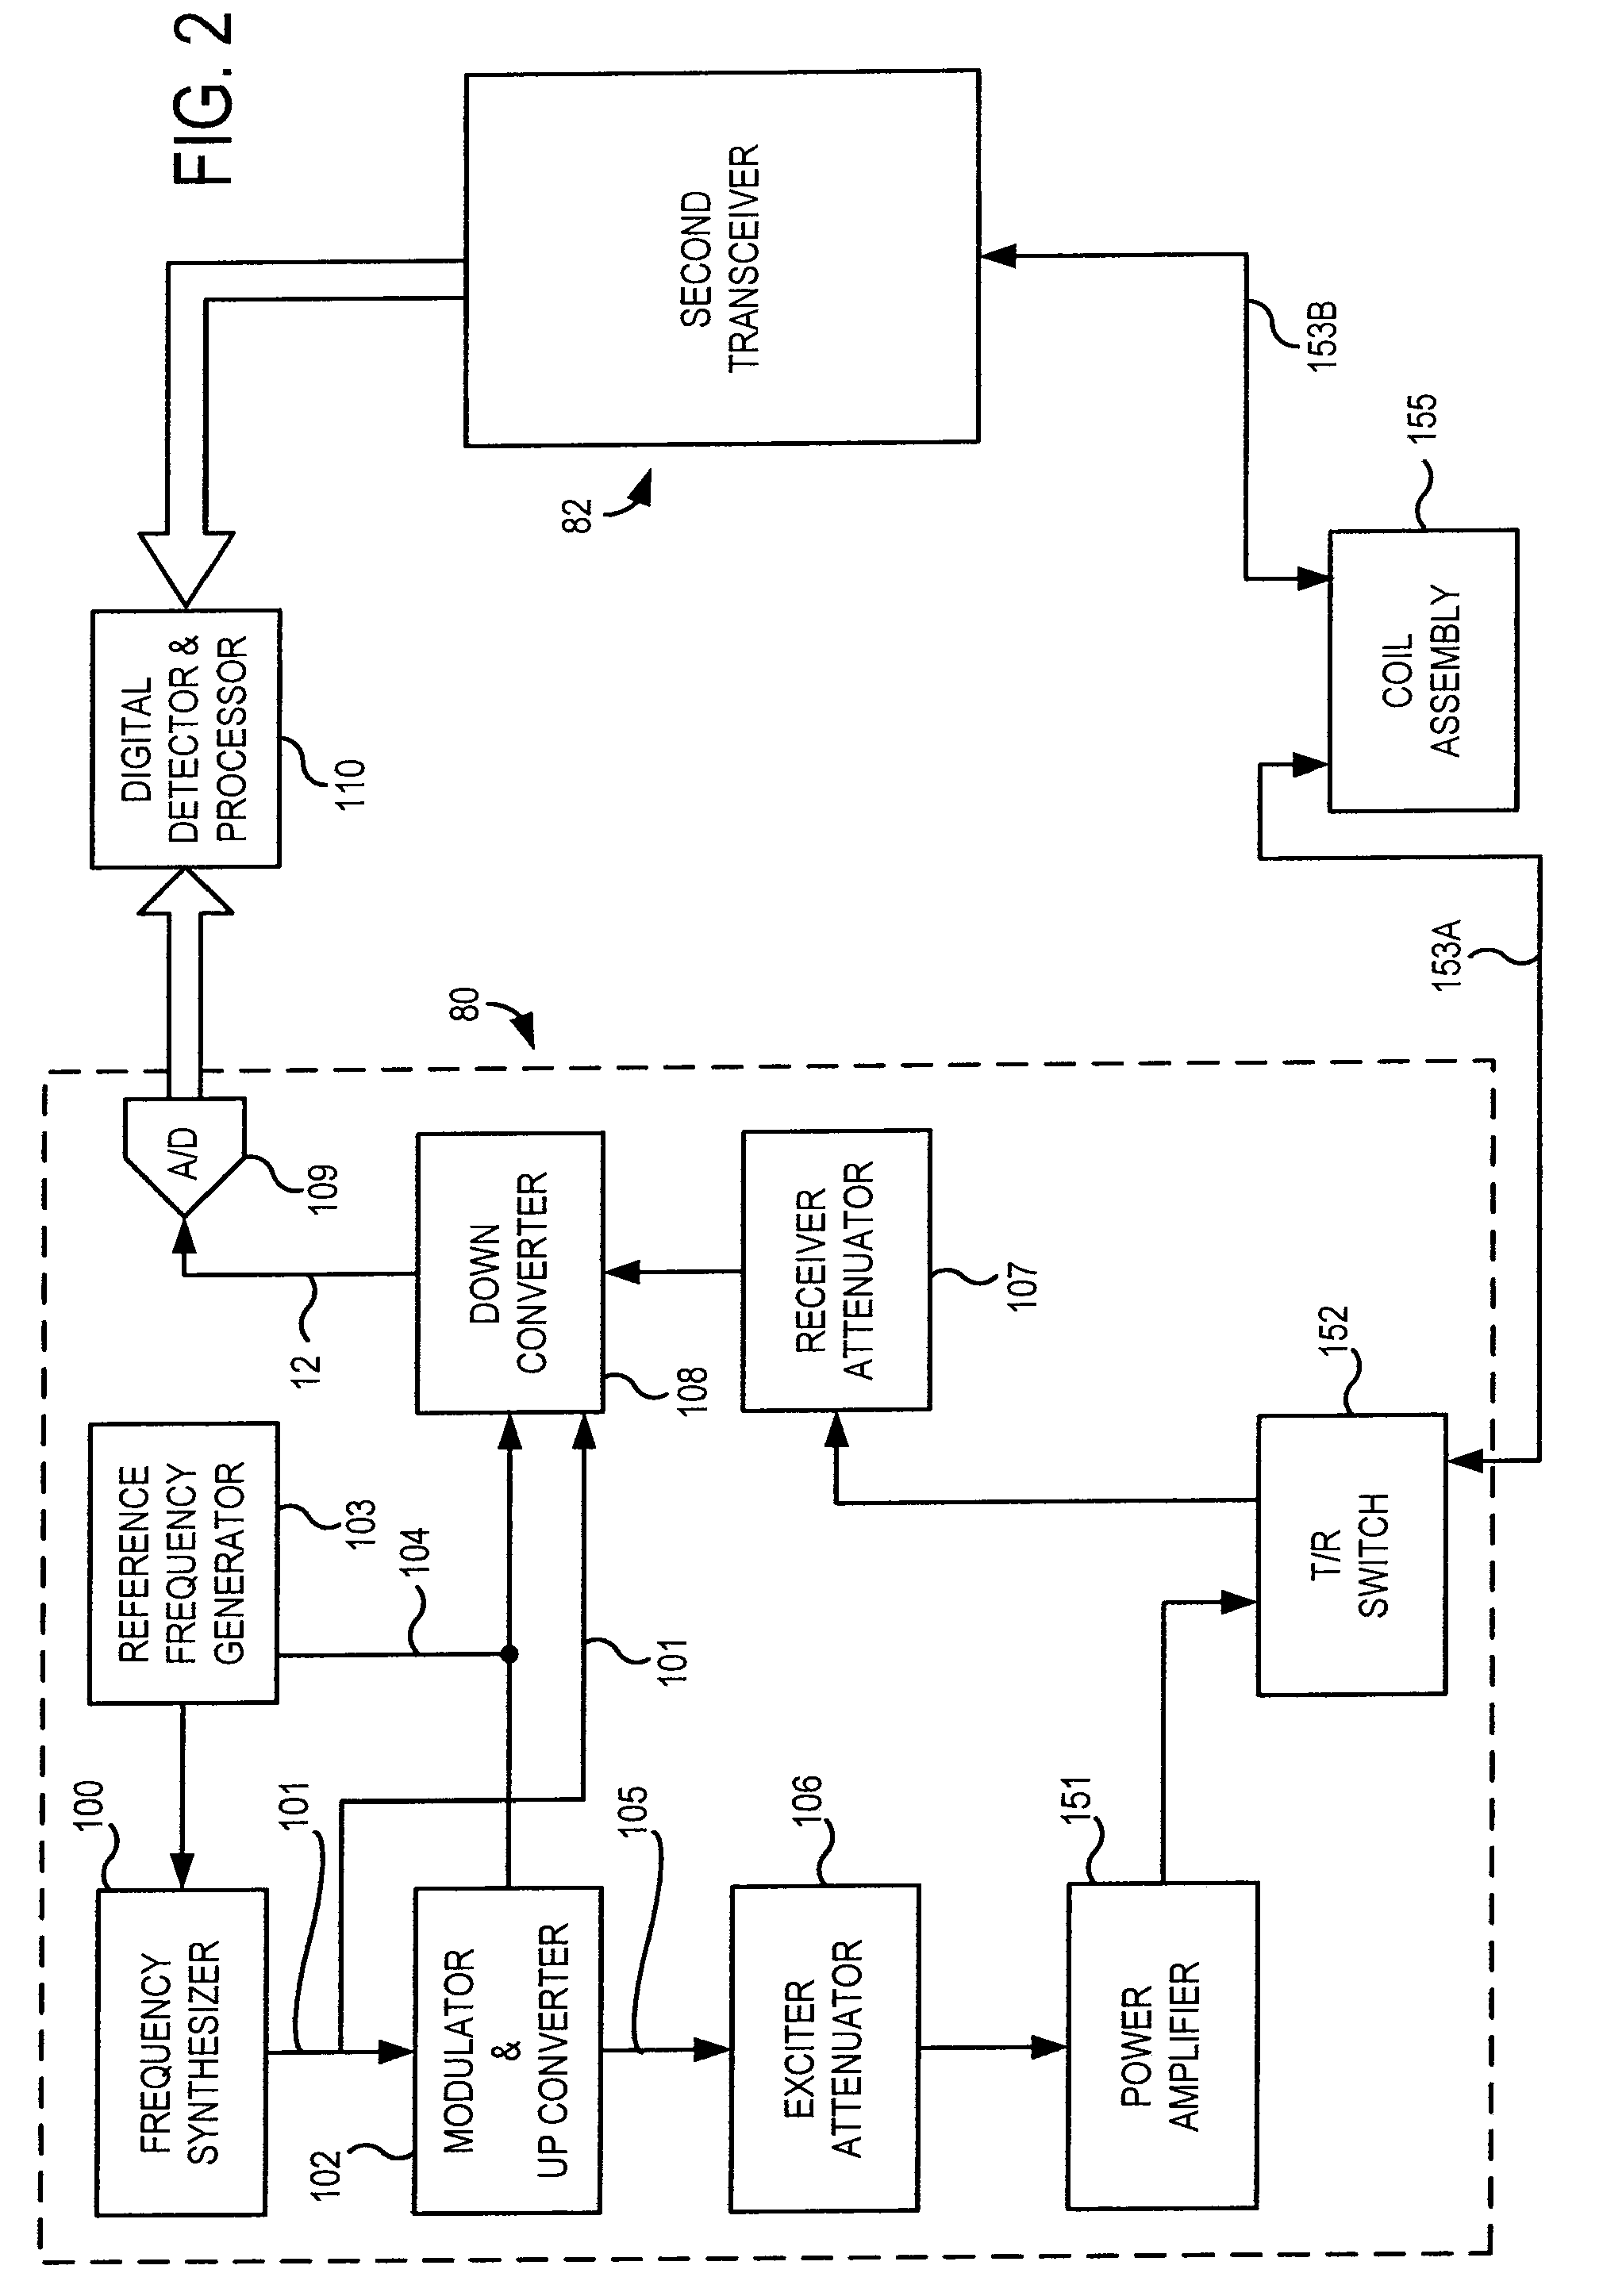 RF coil assembly and method for practicing magnetization transfer on magnetic resonance imaging and spectroscopy systems